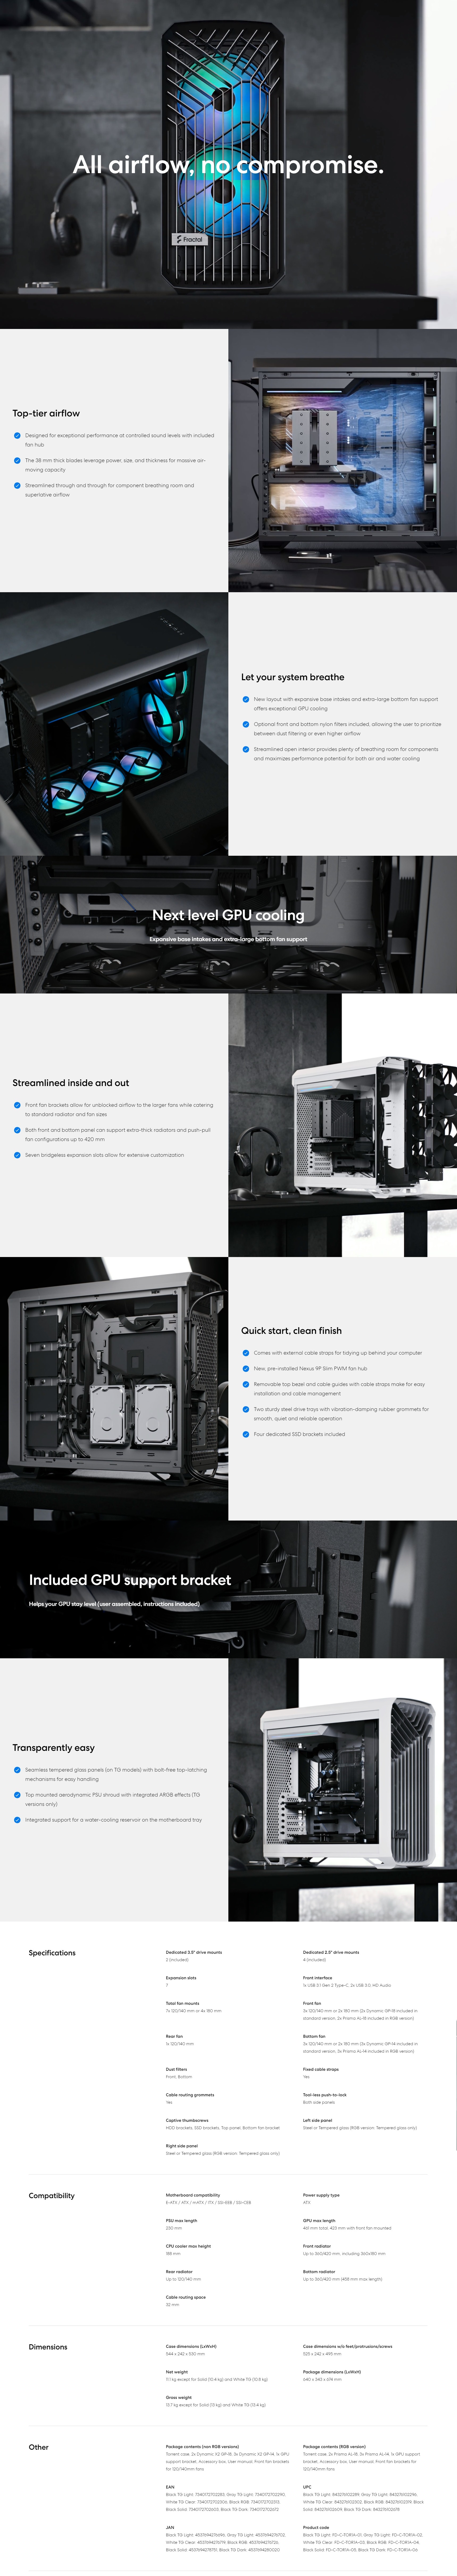 A large marketing image providing additional information about the product Fractal Design Torrent TG Light Tint Mid Tower Case - Black - Additional alt info not provided